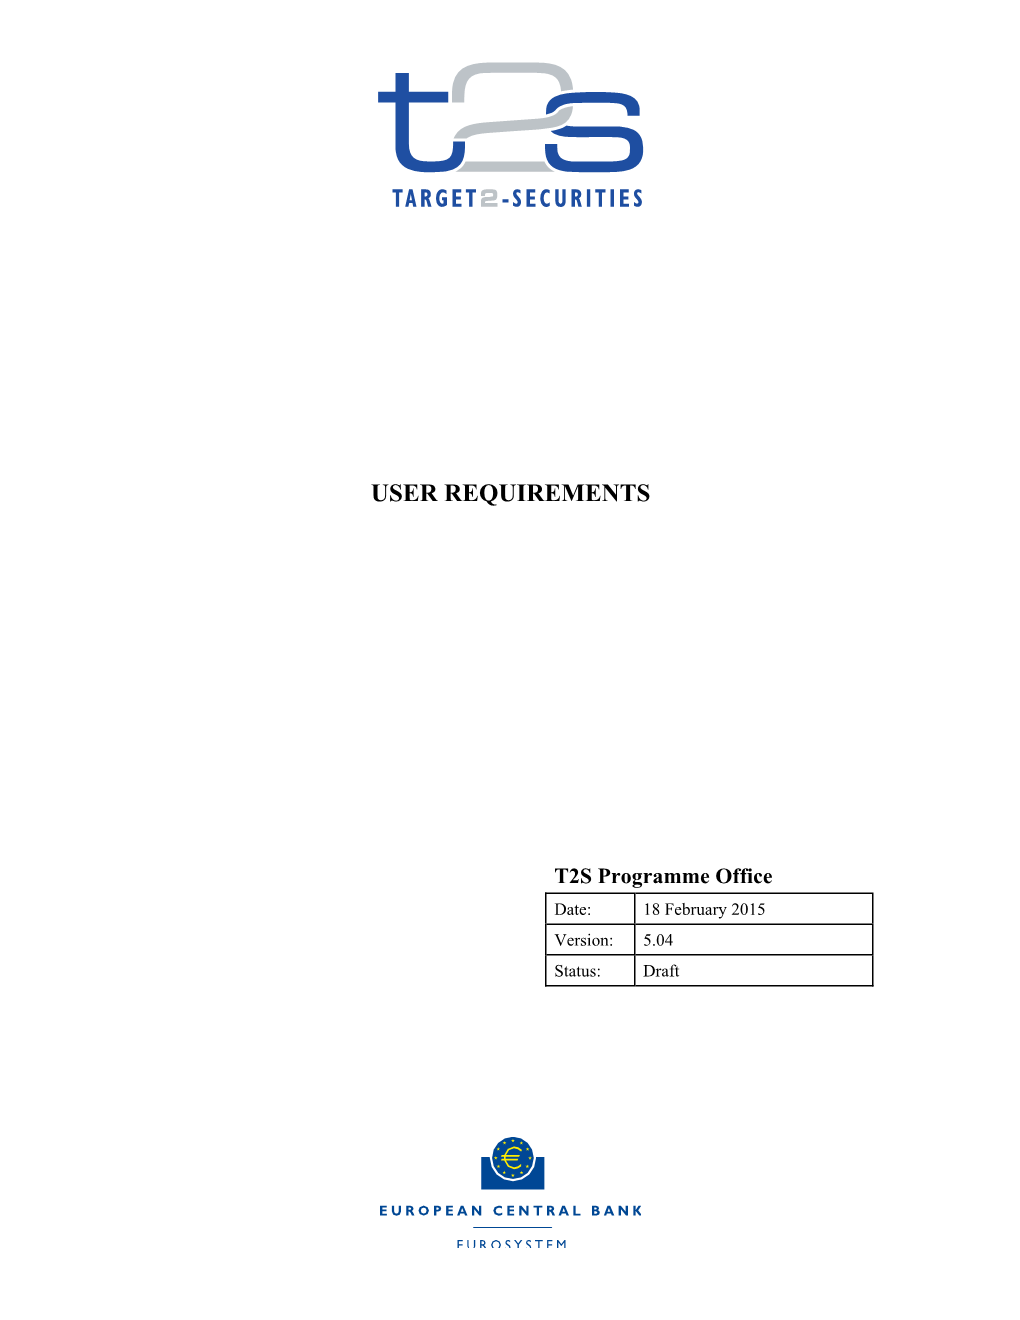 User Requirements